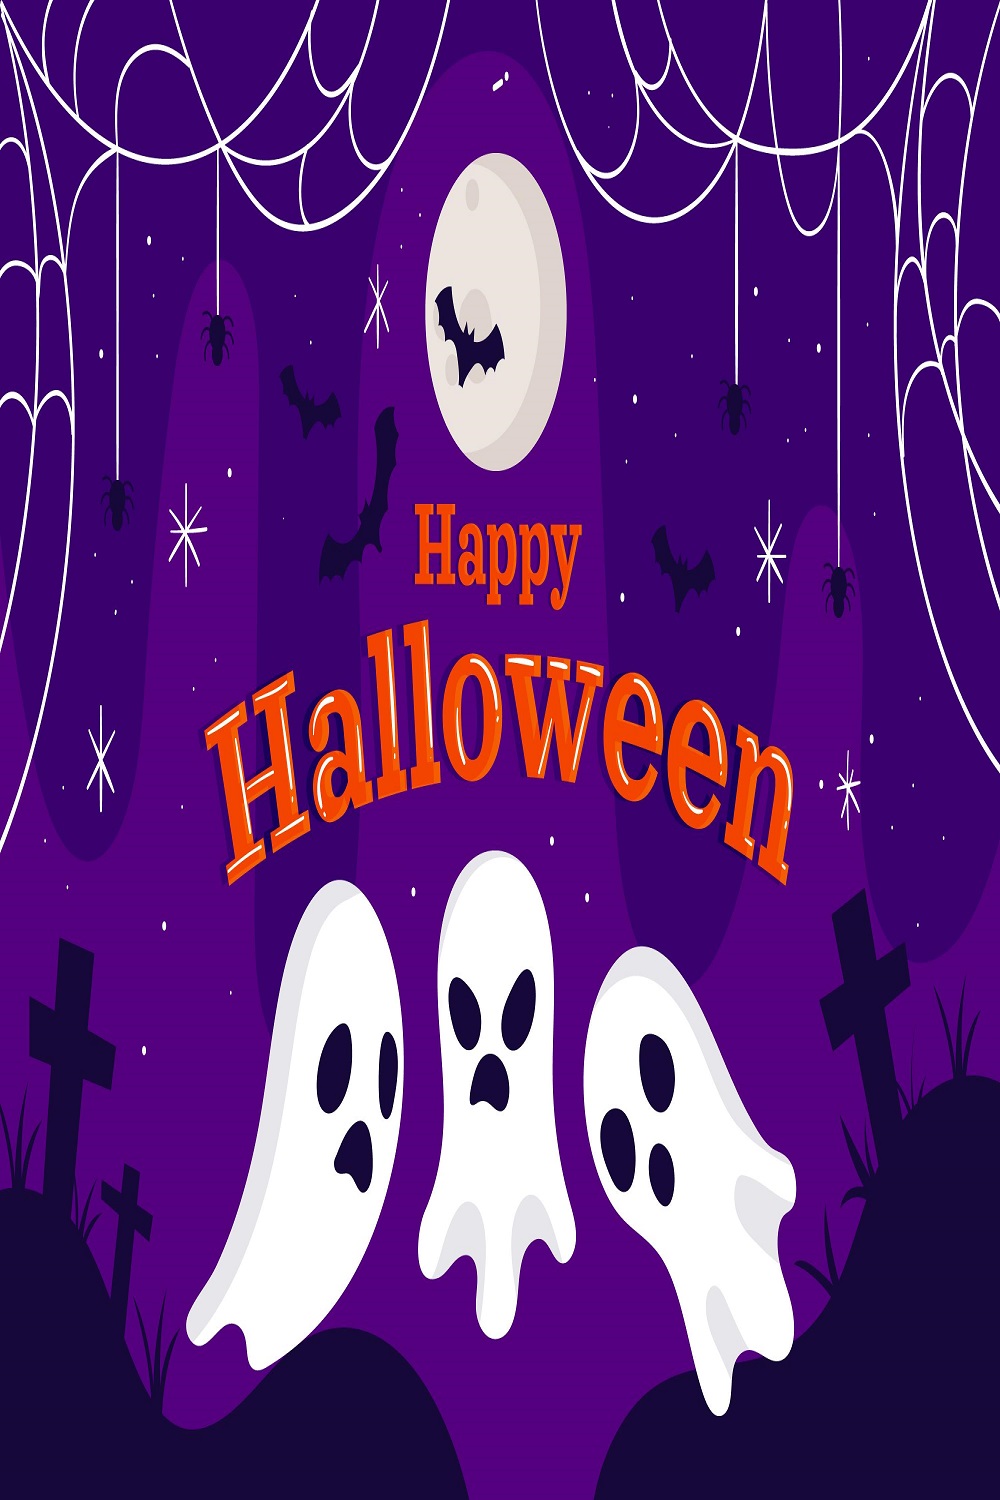 Halloween background pinterest preview image.